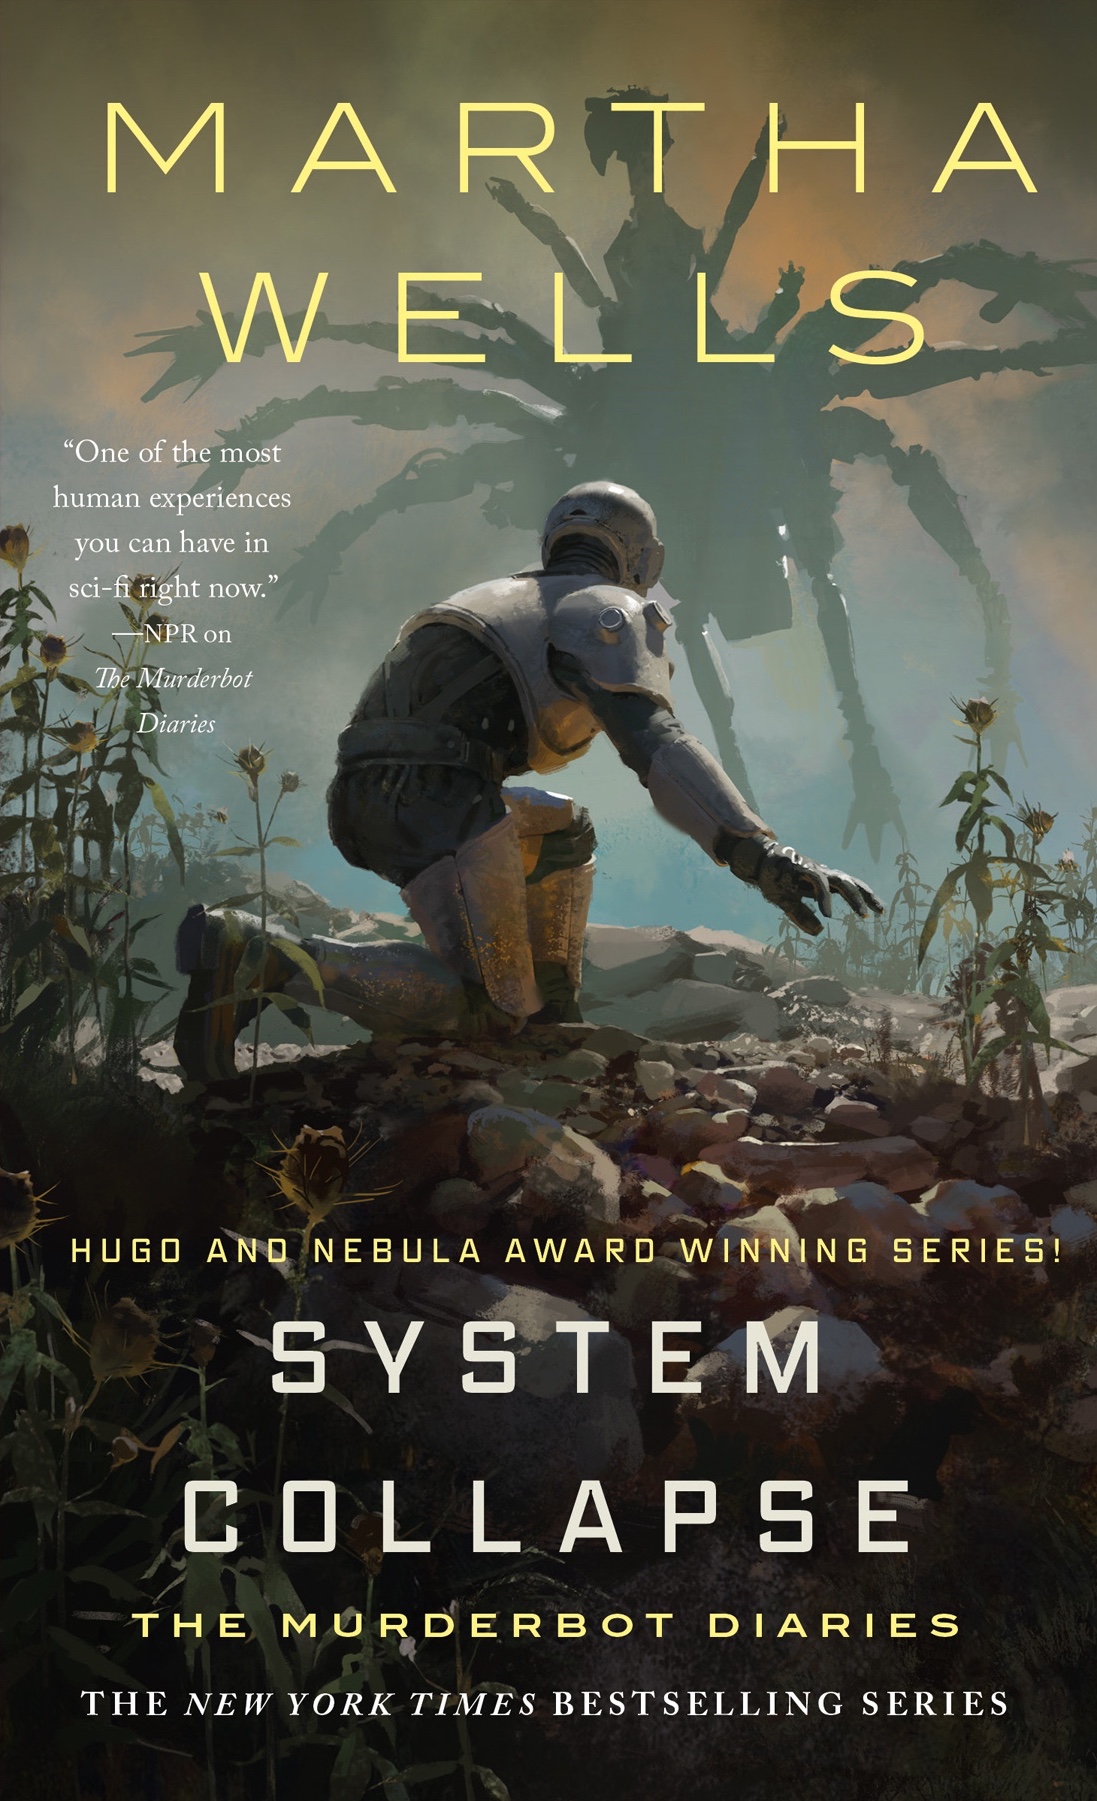 The cover of System Collapse by Martha Wells